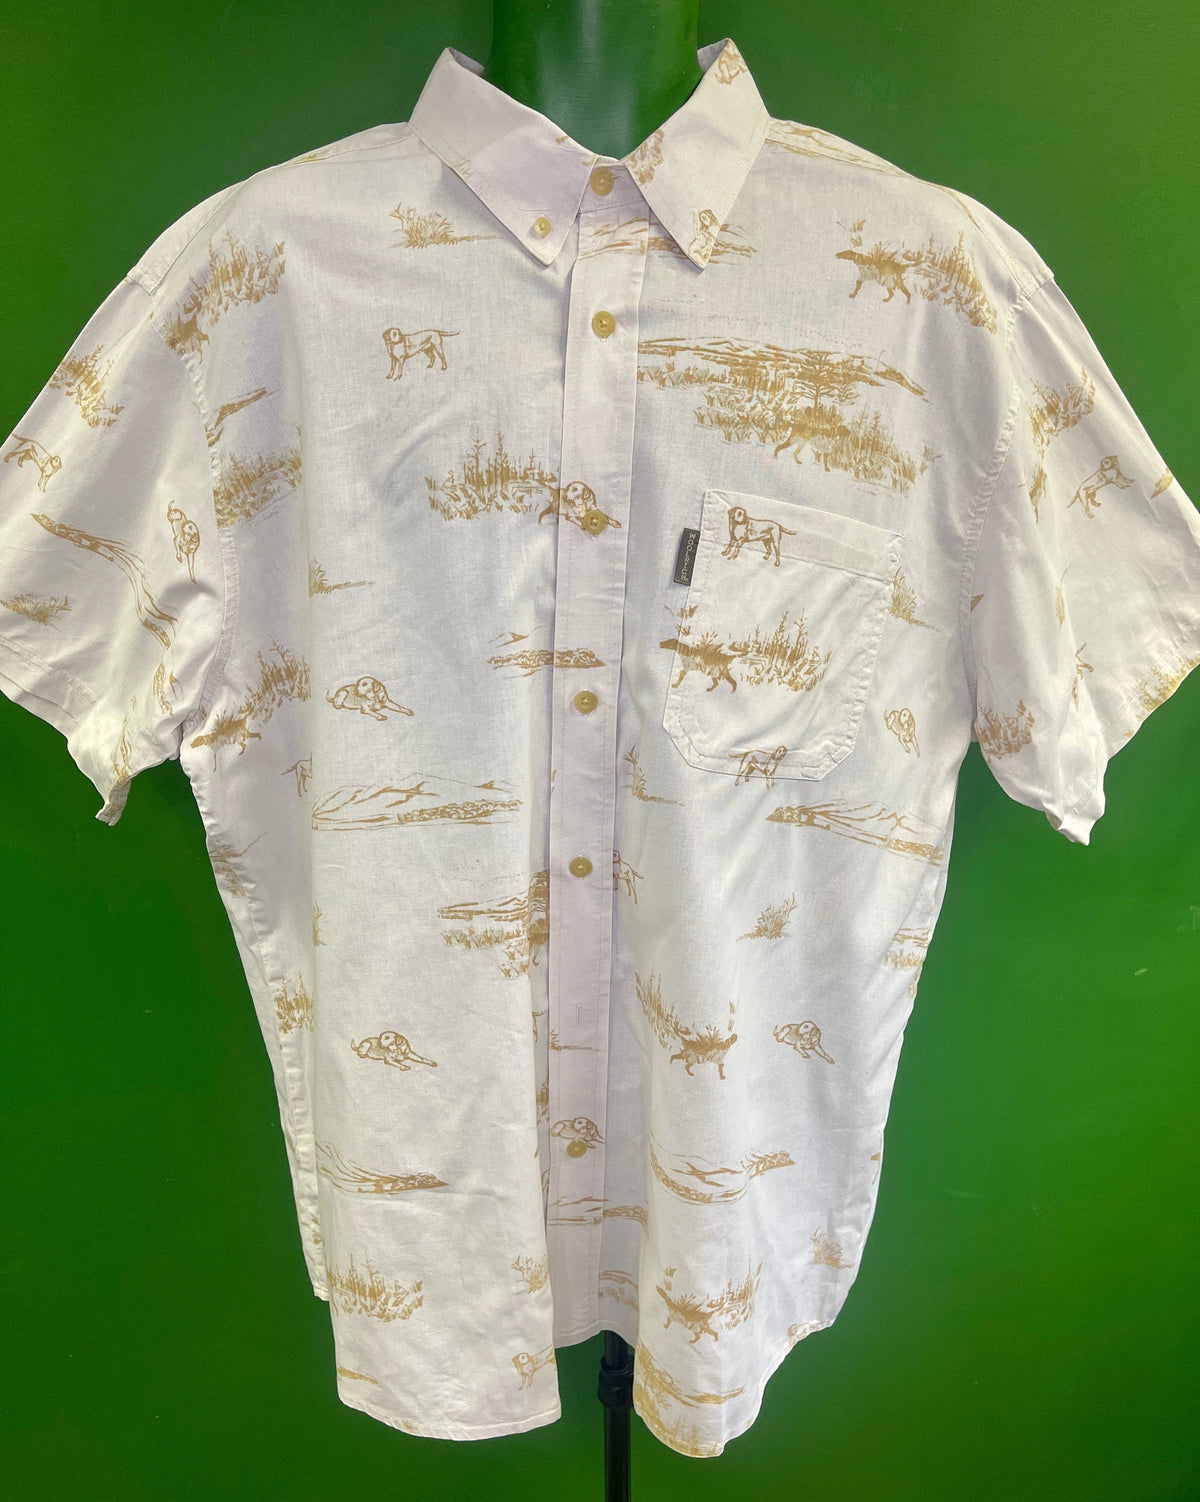 Woolrich Cream Hunting Dog Scenes Printed Shirt Men's X-Large